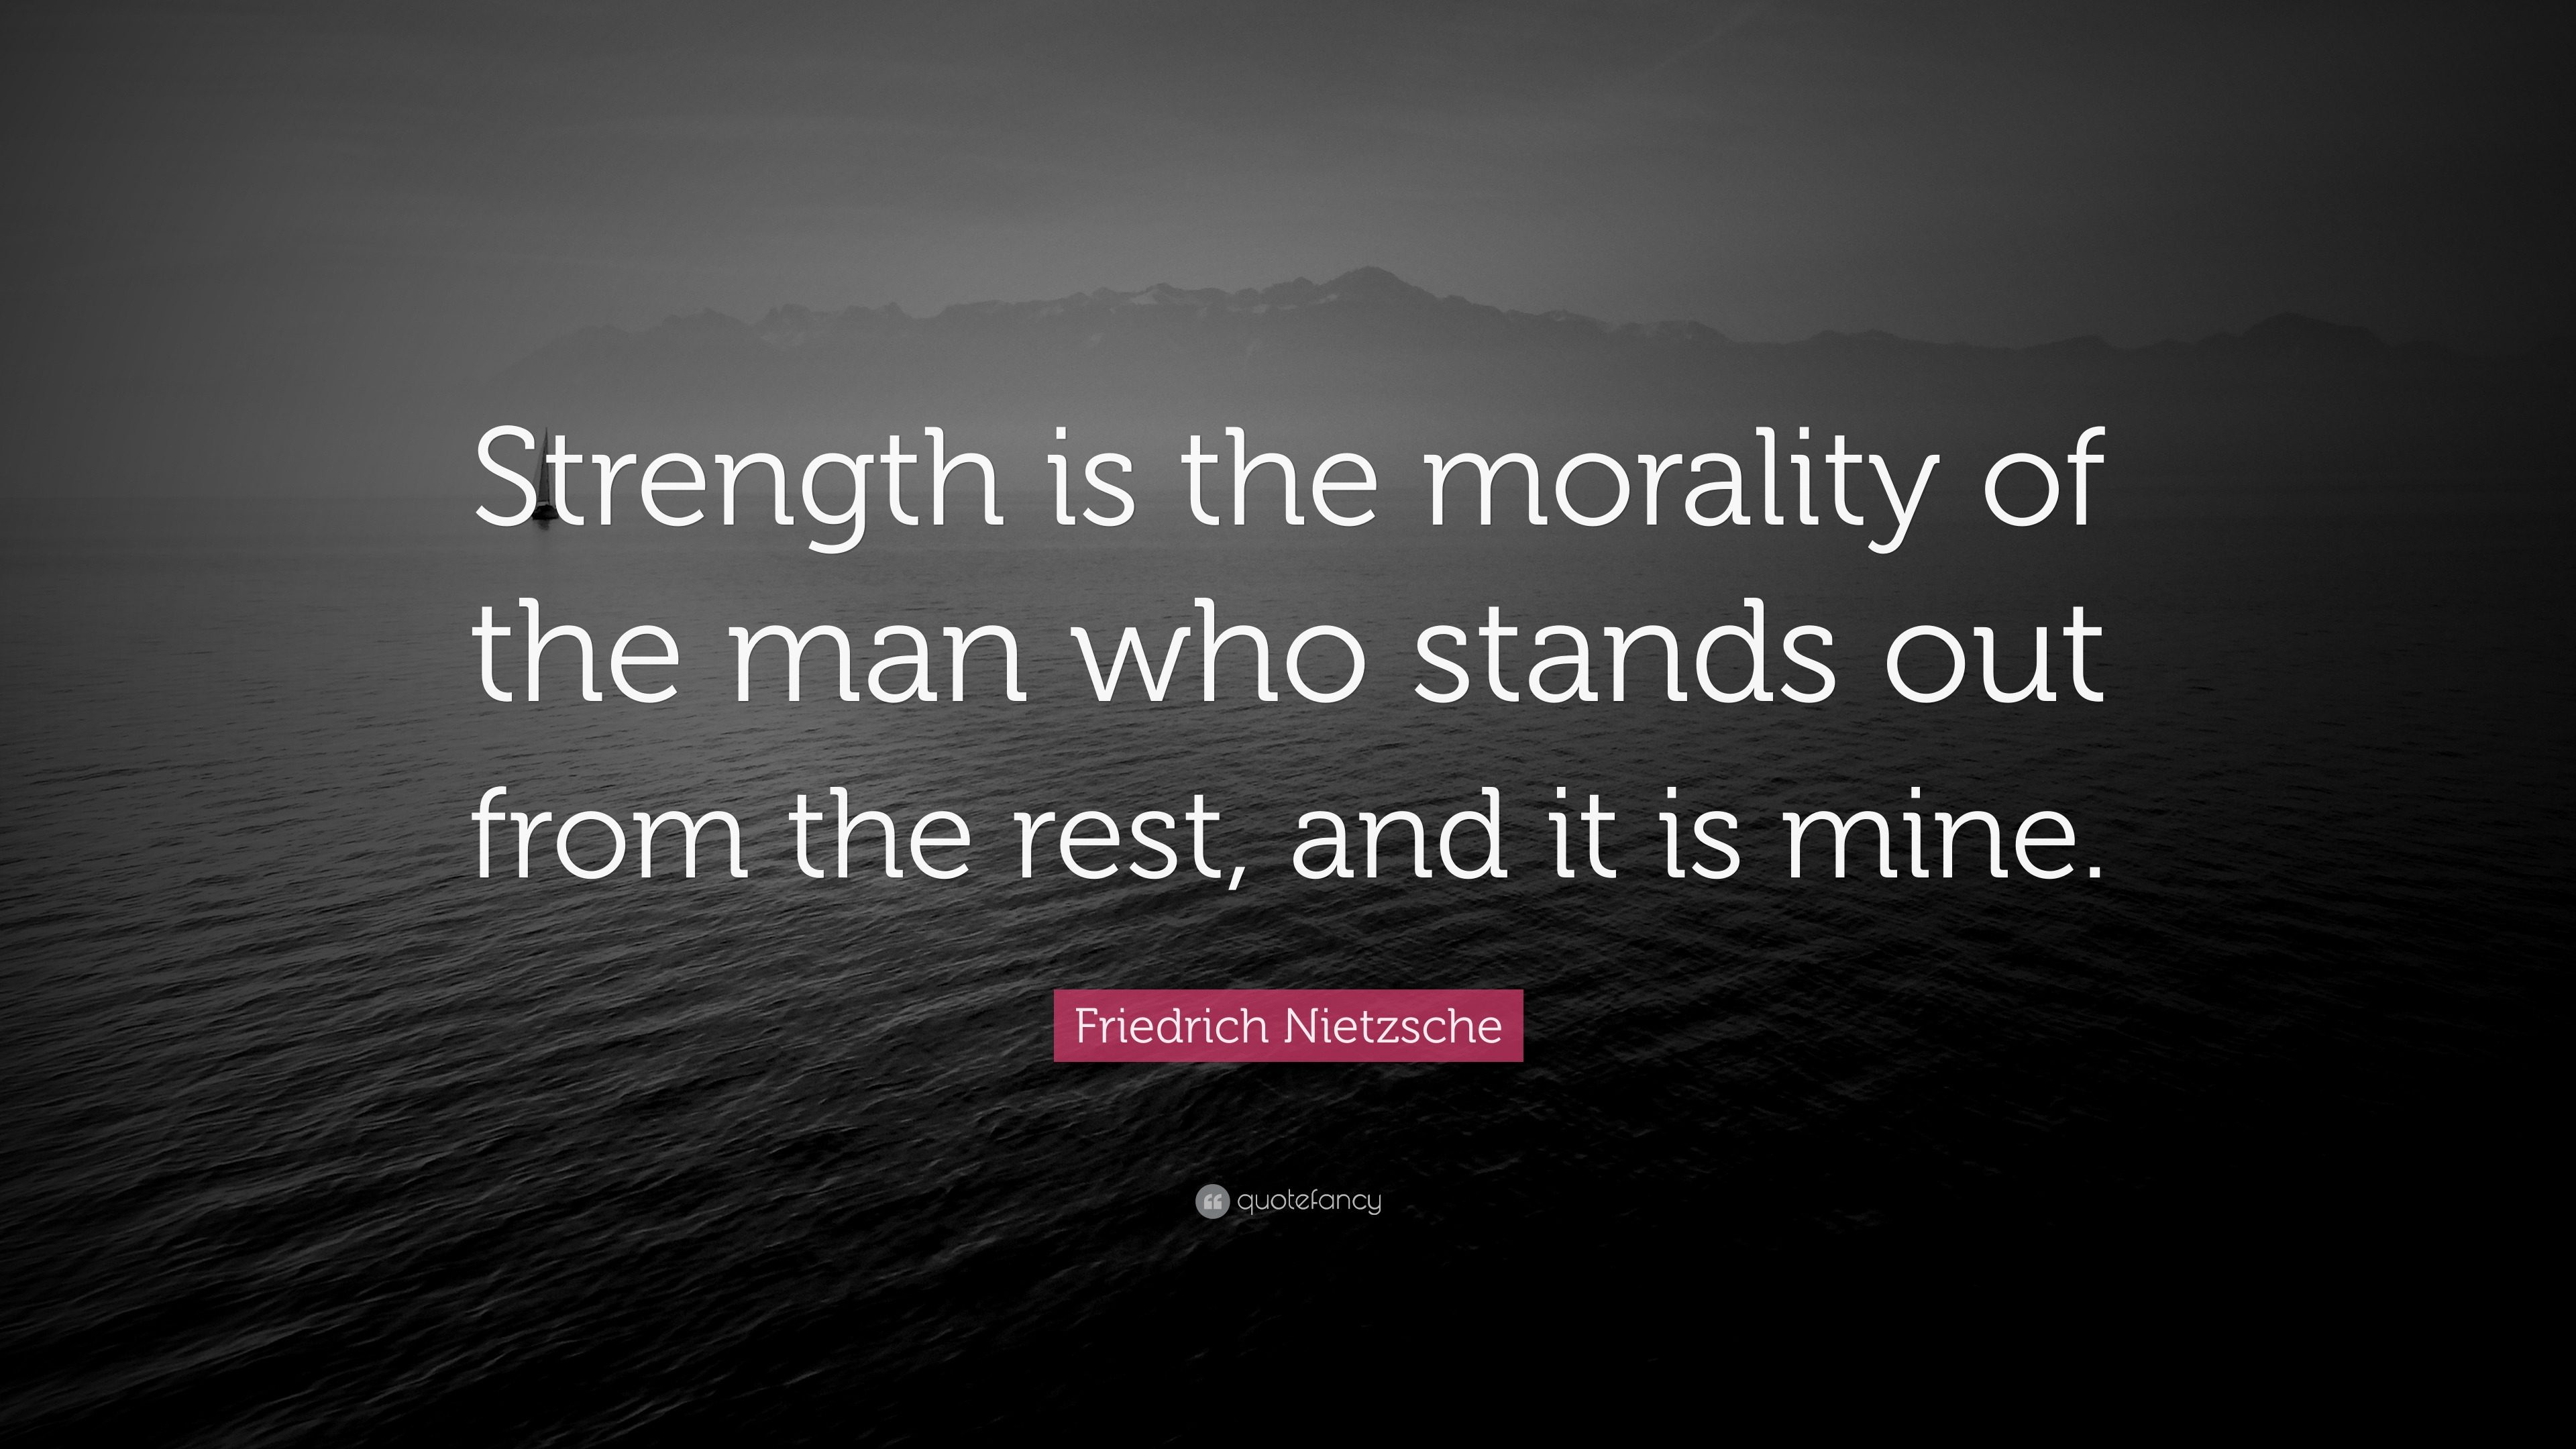 Friedrich Nietzsche Quote “Strength is the morality of